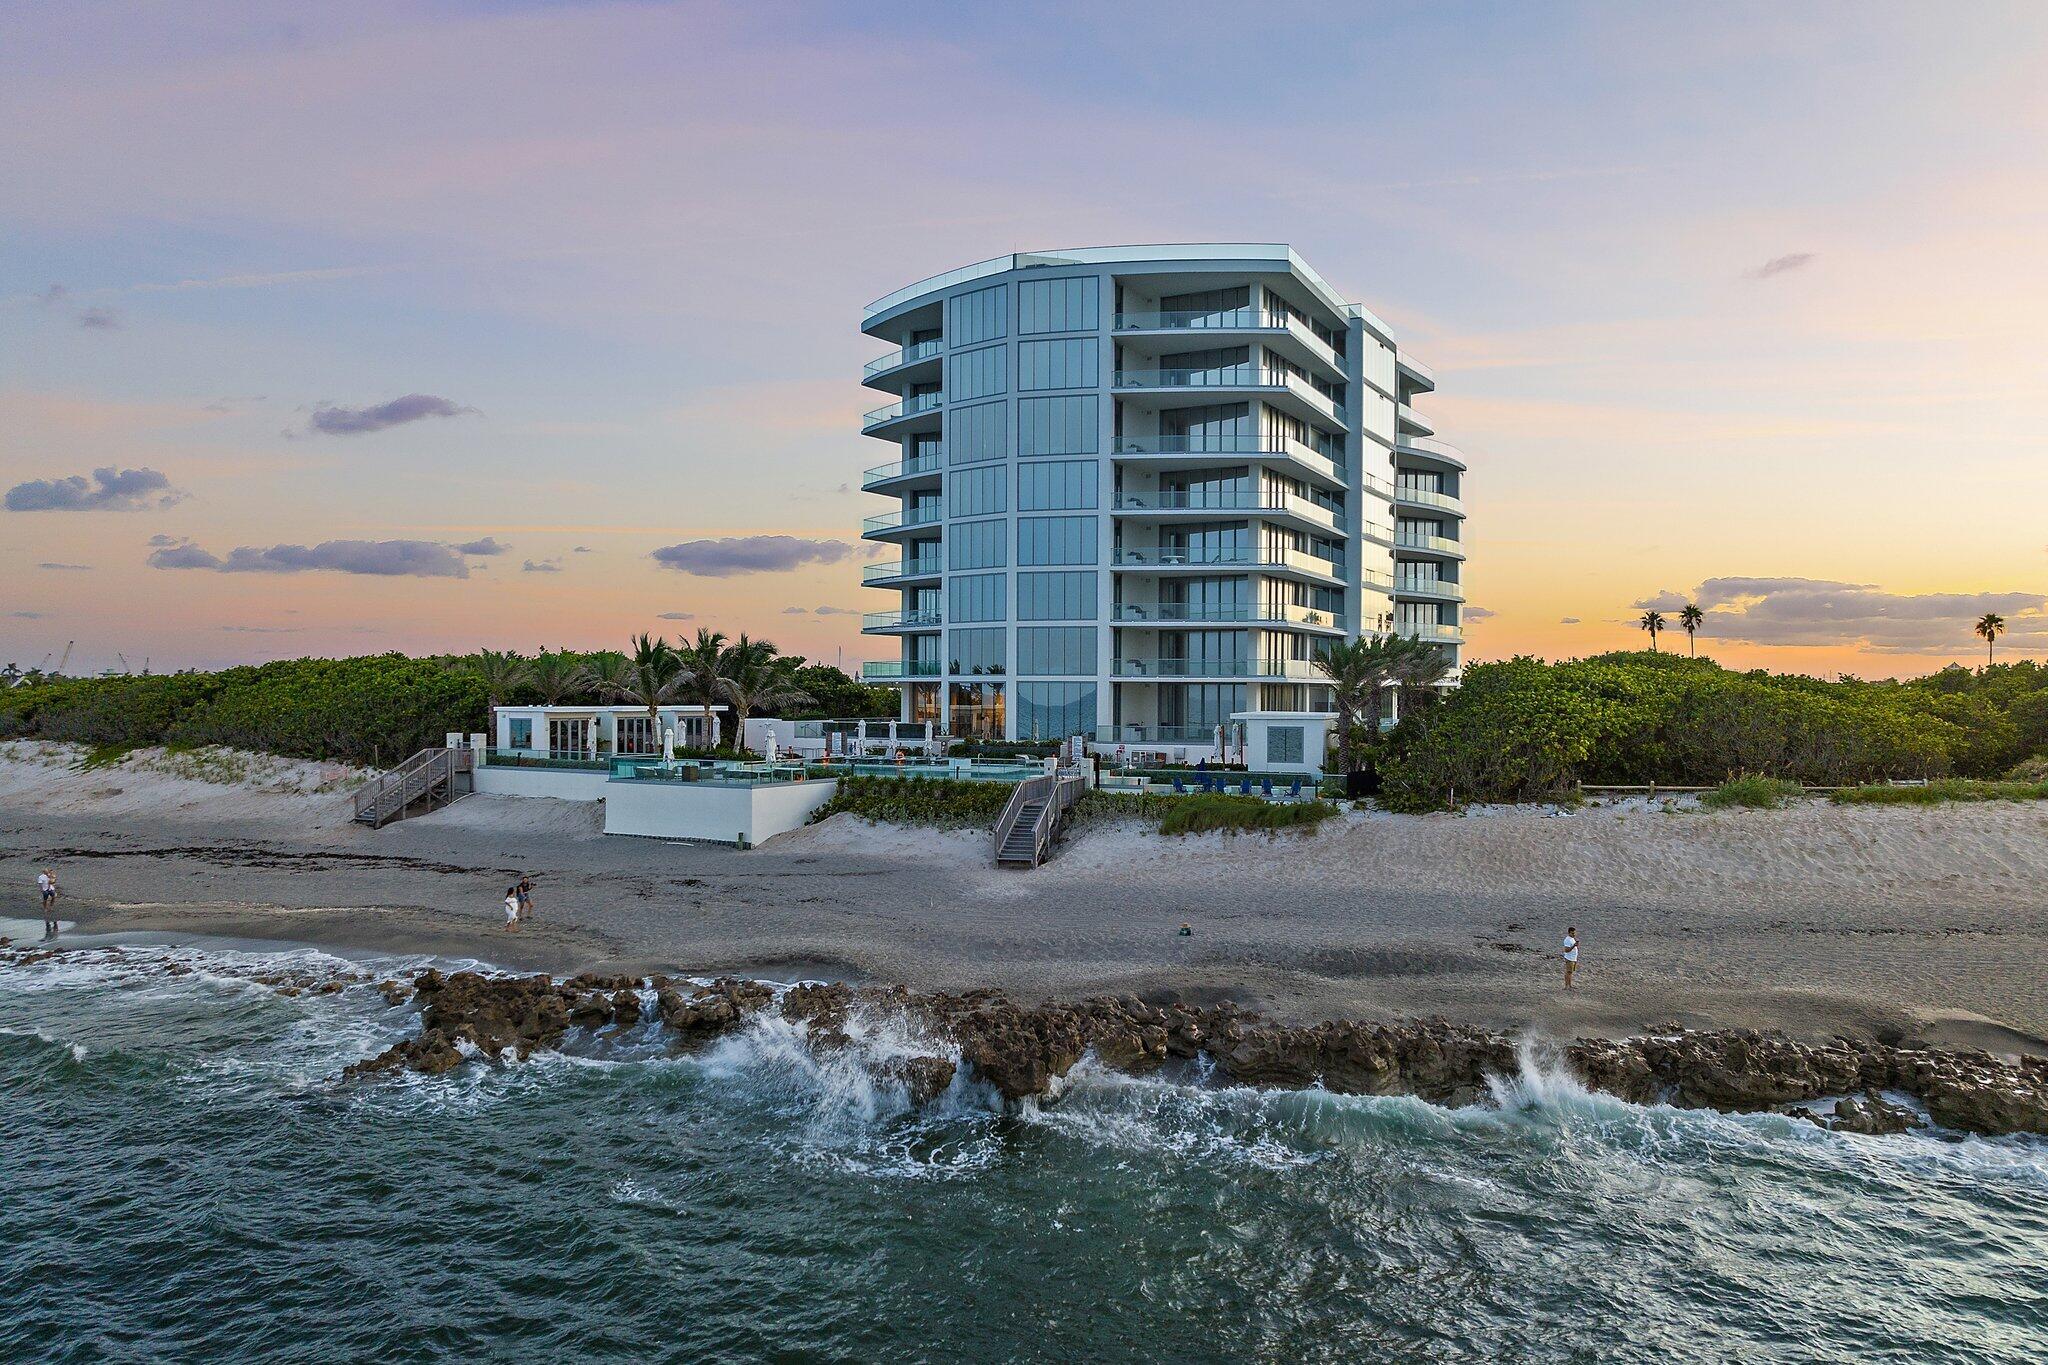 Exceptional opportunity to own this new construction residence in Jupiter Islands one-of-a-kind SeaGlass Condominium. Construction completed in 2022, being the first new condominium development in over 20+ years on Jupiter Island. Only 21 total residences offering uncompromised luxury, breathtaking views while also offering unprecedented privacy. This property is located between the ocean, Intracoastal, and lush protected landscapes. Residence 203 is one of one in the building, offering some of the largest outdoor living areas with direct pool and ocean access, and 10+ foot ceiling heights in primary living areas and bedrooms. 203 offers a large open floorplan with floor to ceiling glass, Limestone "Crema Saida" flooring, and stunning direct ocean views. The floorplan includes 3 Bedrooms, 4.5 baths, with a Den, all bedrooms include ensuite baths, and walk-in wardrobes. Master bedroom has direct ocean views with private terrace access, double walk-in wardrobes, individual master bathrooms with a steam shower and full height frameless glass enclosure, imported marble throughout master bath, Italian wall-mounted vanities with designer mirrors and lighting.

Other features include a summer Kitchen, imported Italian solid core wood interior door and casings, recessed down lighting throughout interior, Imported Snaidero cabinetry with integrated task lighting, professional stainless steel ventilation hood, double Miele convection ovens, Miele 48'' gas rangetop, Miele refrigerator and freezer column with cabinet panel front, full height Miele wine column with glass and cabinet panel front, and two Miele dishwashers. Other building amenities include a gated arrival, 24/7 attended two story lobby designed by Champalimaud Design, emergency generator to power residential comfort, oceanfront infinity-edge heated swimming pool, pool side sandy beach with chaise lounges, two gated stair accesses to the beach, beachside summer kitchen and outdoor viewing terrace, heated spa, full time property manager, fitness center, yoga meditation lawn, club room with catering kitchen, lounge seating and game area, outdoor social terrace with BBQ and fire pit, dedicated dog walk area and bathing station, mail &amp; package room with keypad access, and dedicated bicycle storage.